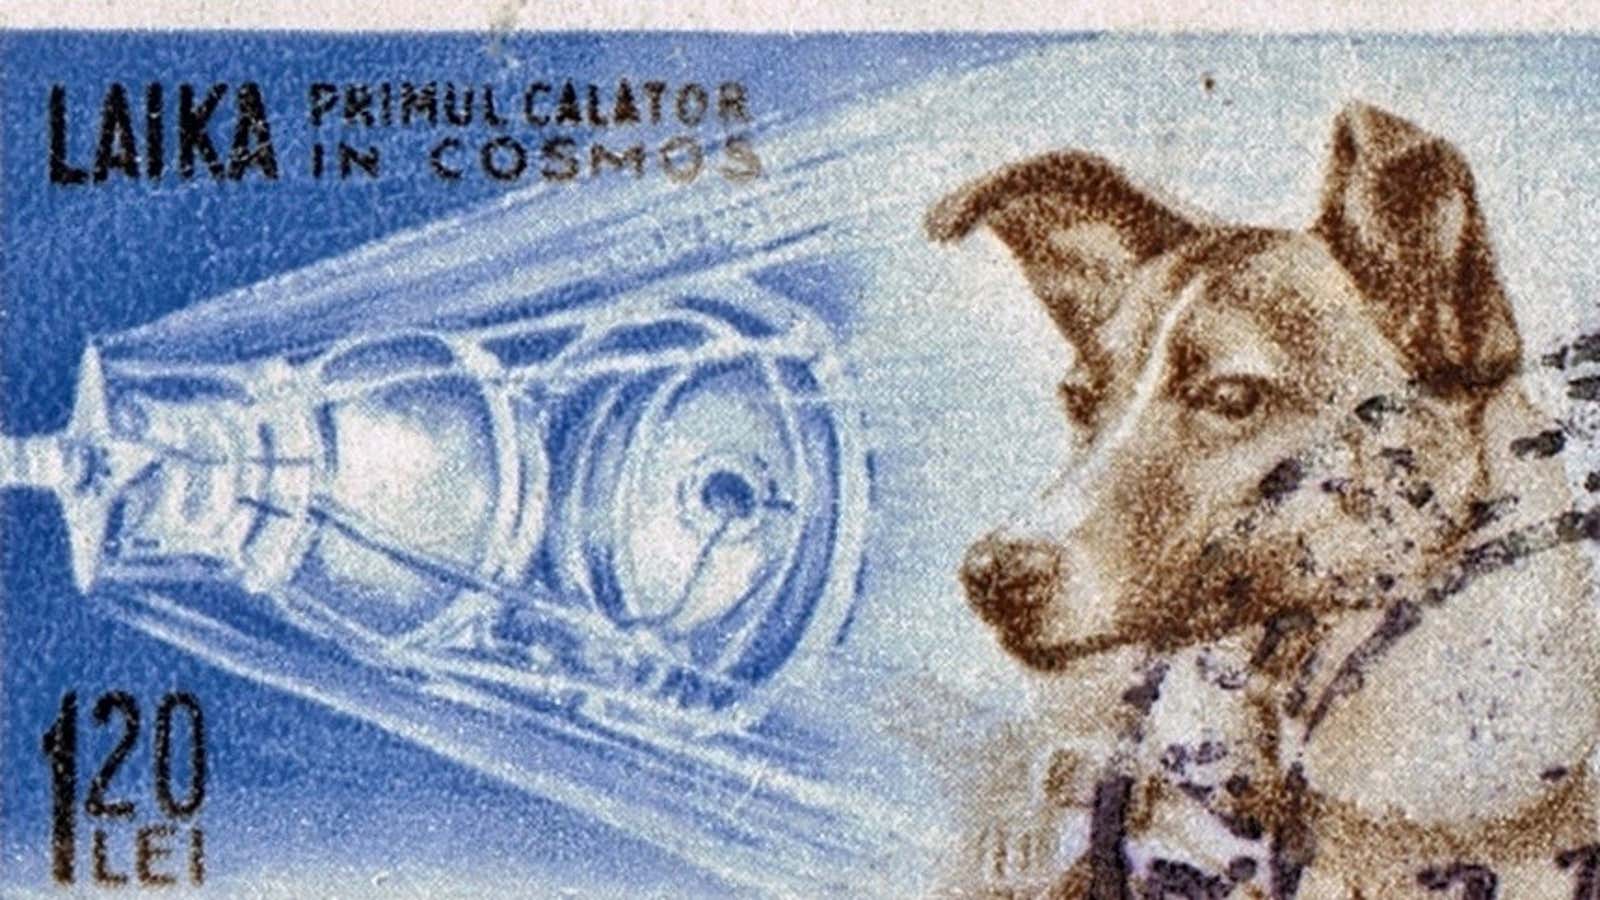 A Romanian stamp commemorating Laika, the Russian cosmonaut (1959).